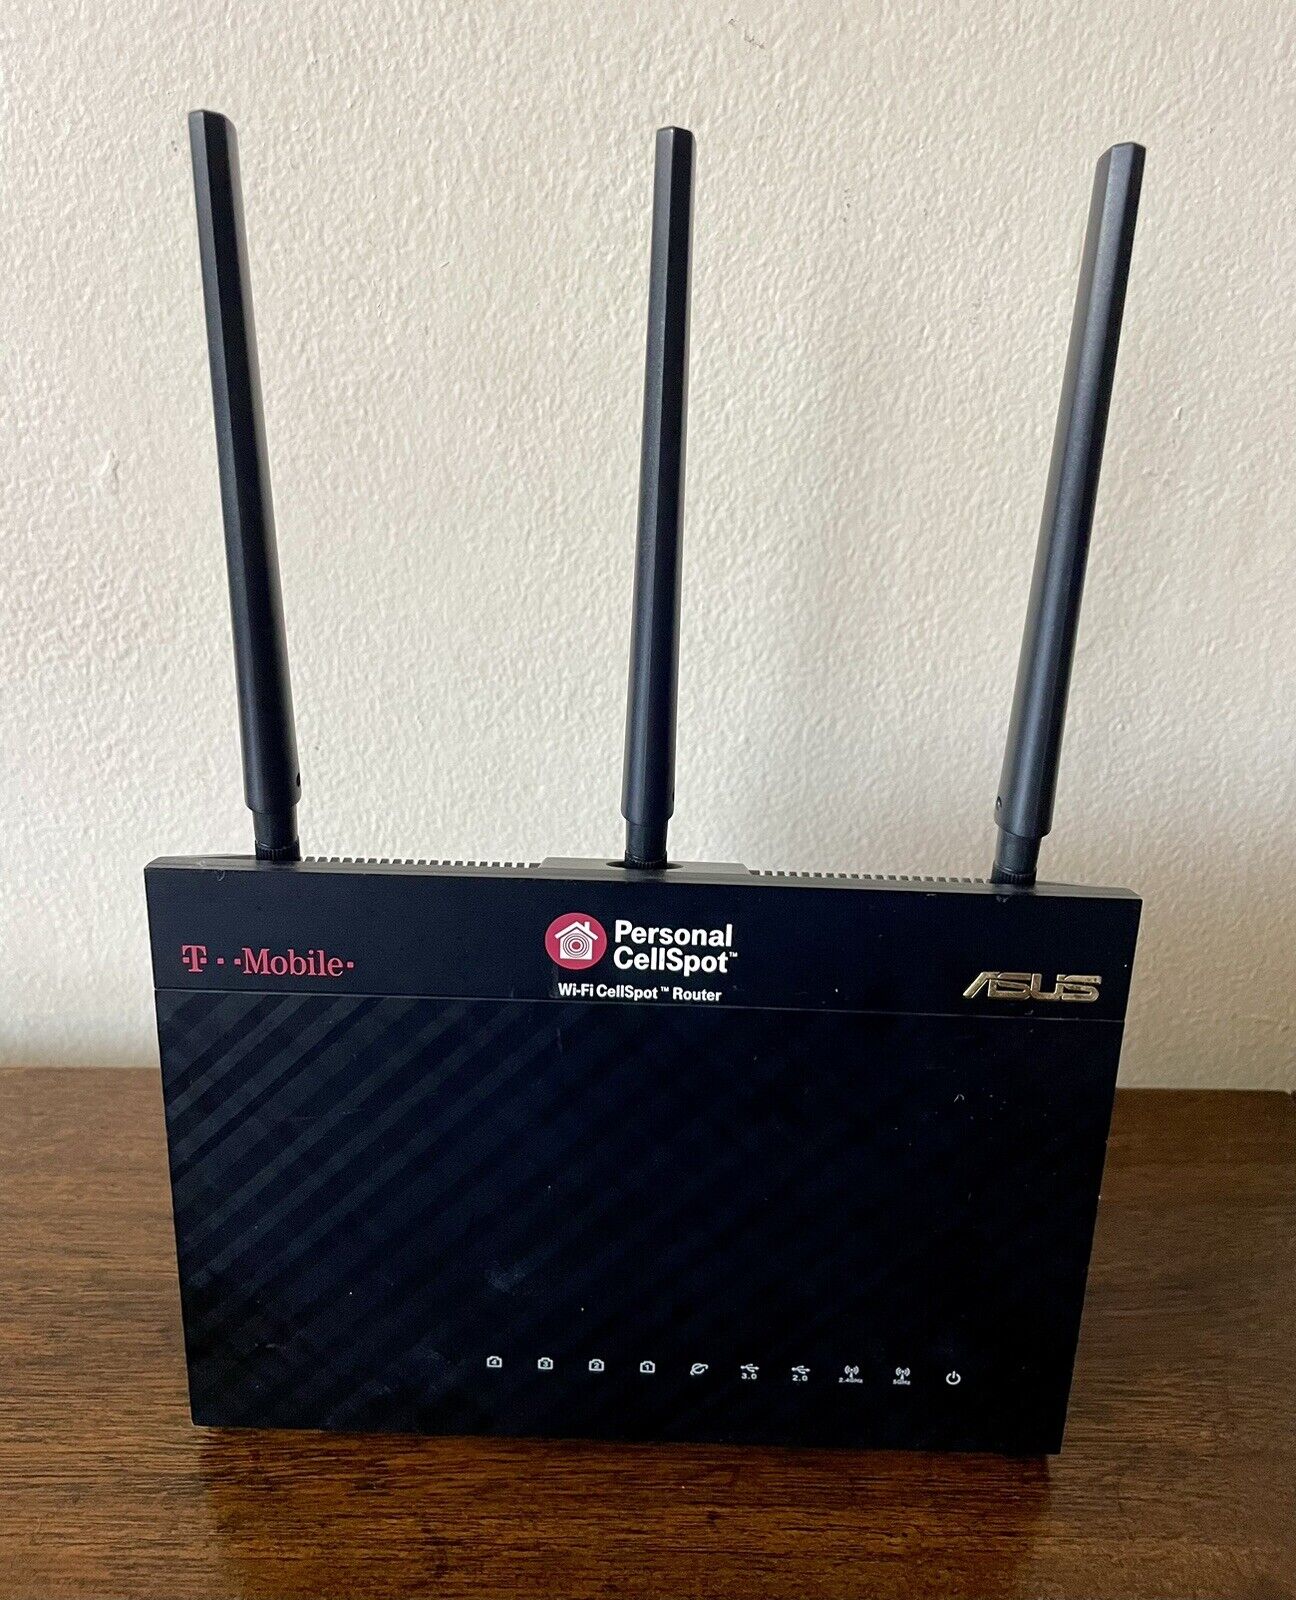 T-Mobile TM-AC1900 ASUS Personal CellSpot Wi-Fi Dual Band Wireless Router